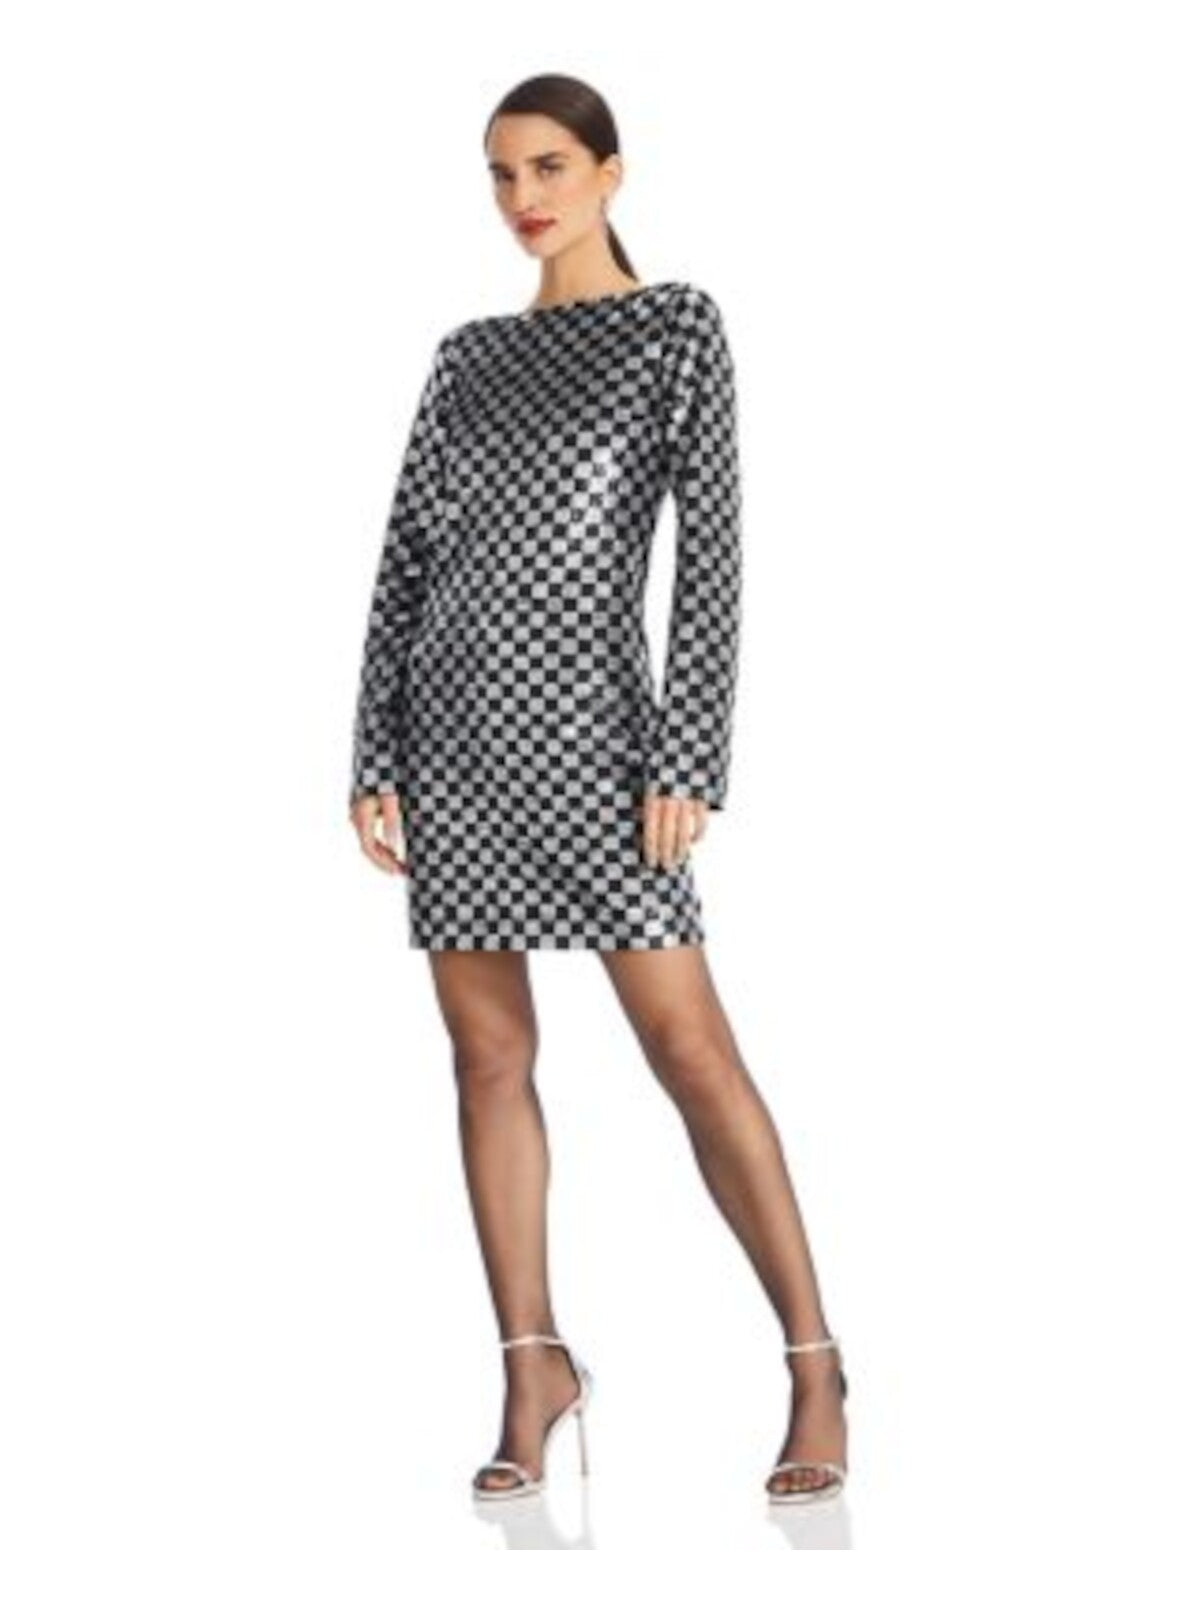 MICHAEL KORS Womens Black Sequined Zippered Lined Check Long Sleeve Boat Neck Above The Knee Cocktail Sheath Dress 6